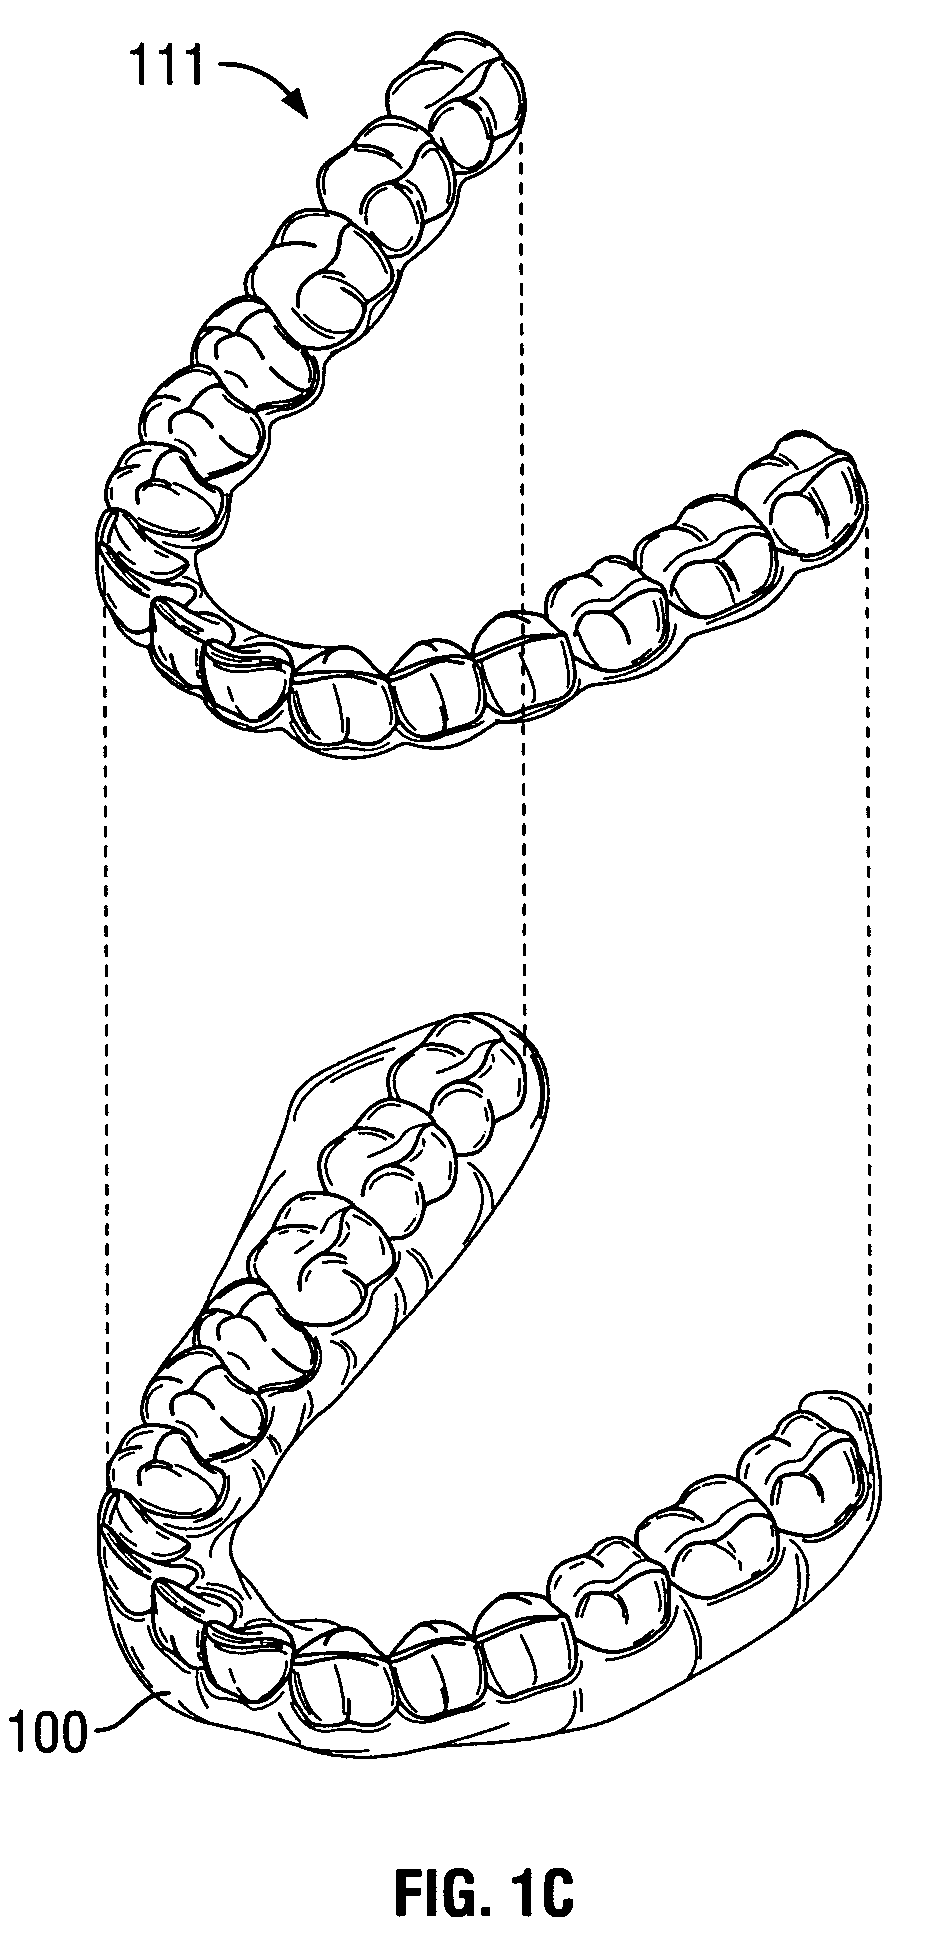 Guide apparatus and methods for making tooth positioning appliances